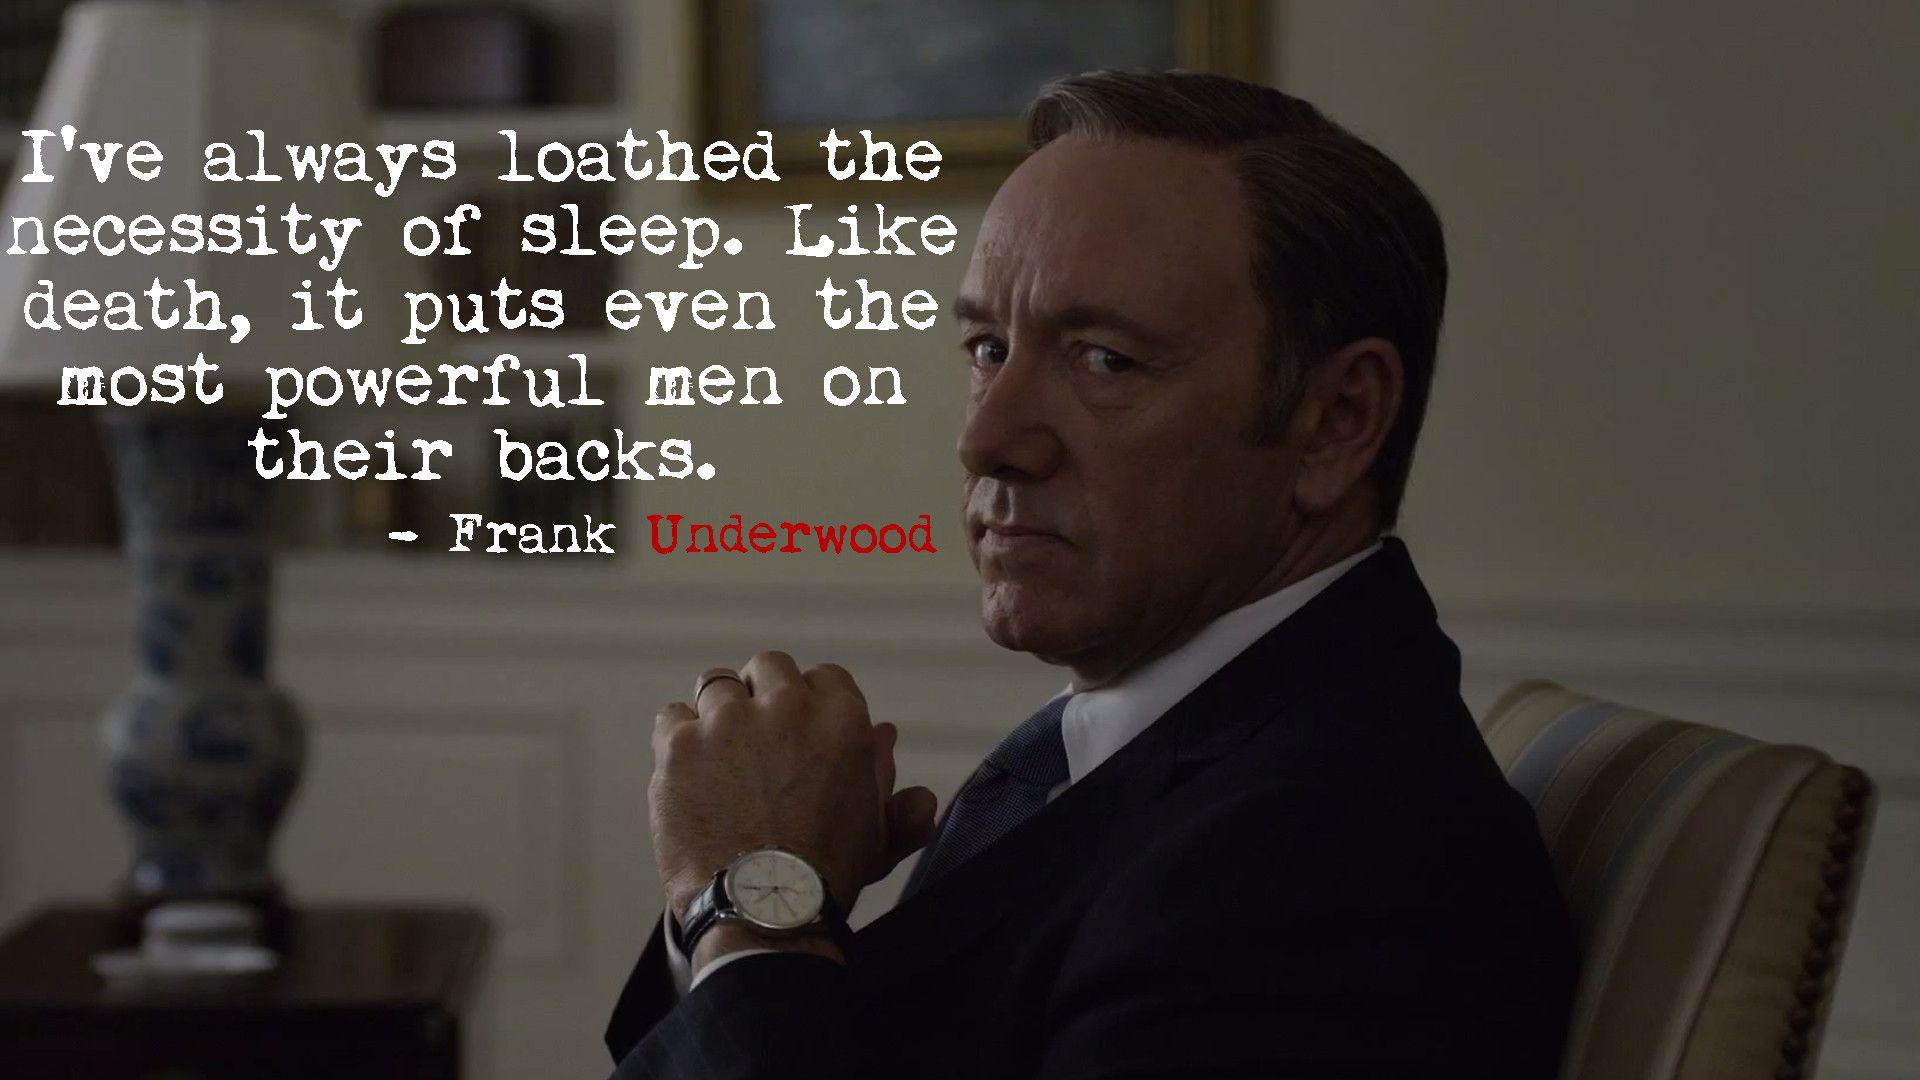 House of Cards image (50 wallpaper)